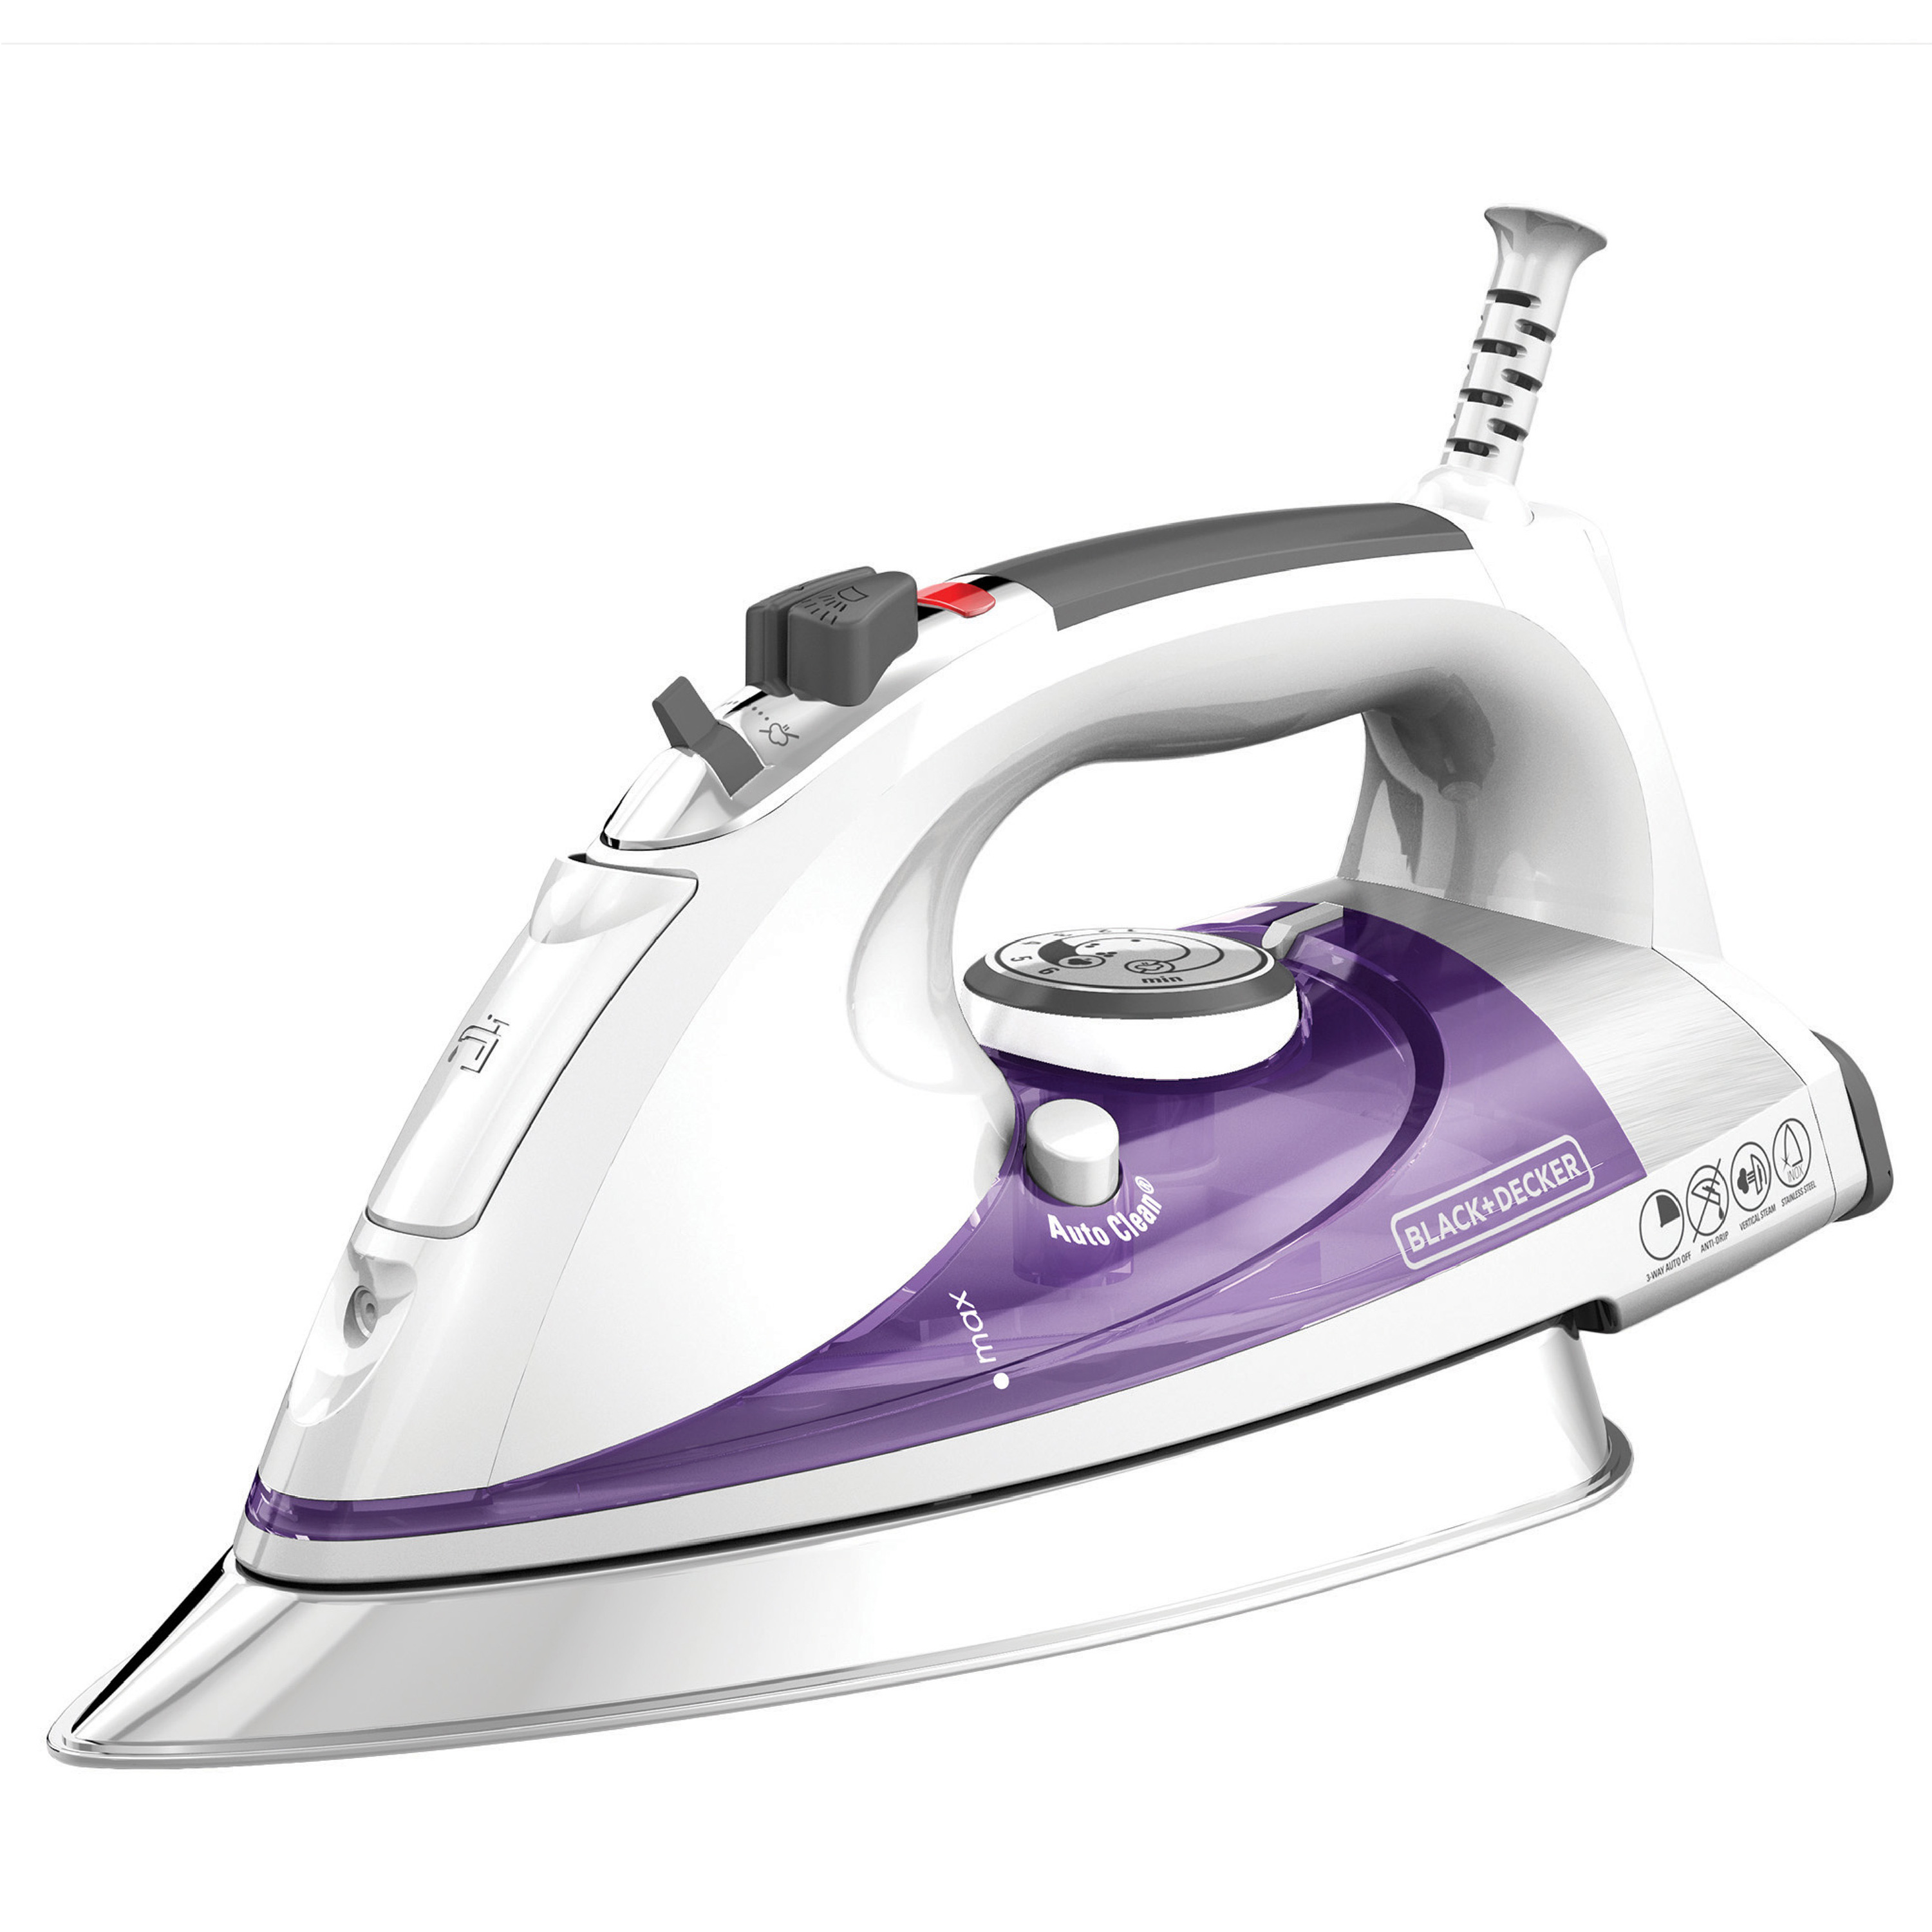 BLACK+DECKER Professional Steam Iron with Stainless Steel Soleplate and Extra-Long Cord, Purple, IR1350S - image 1 of 11